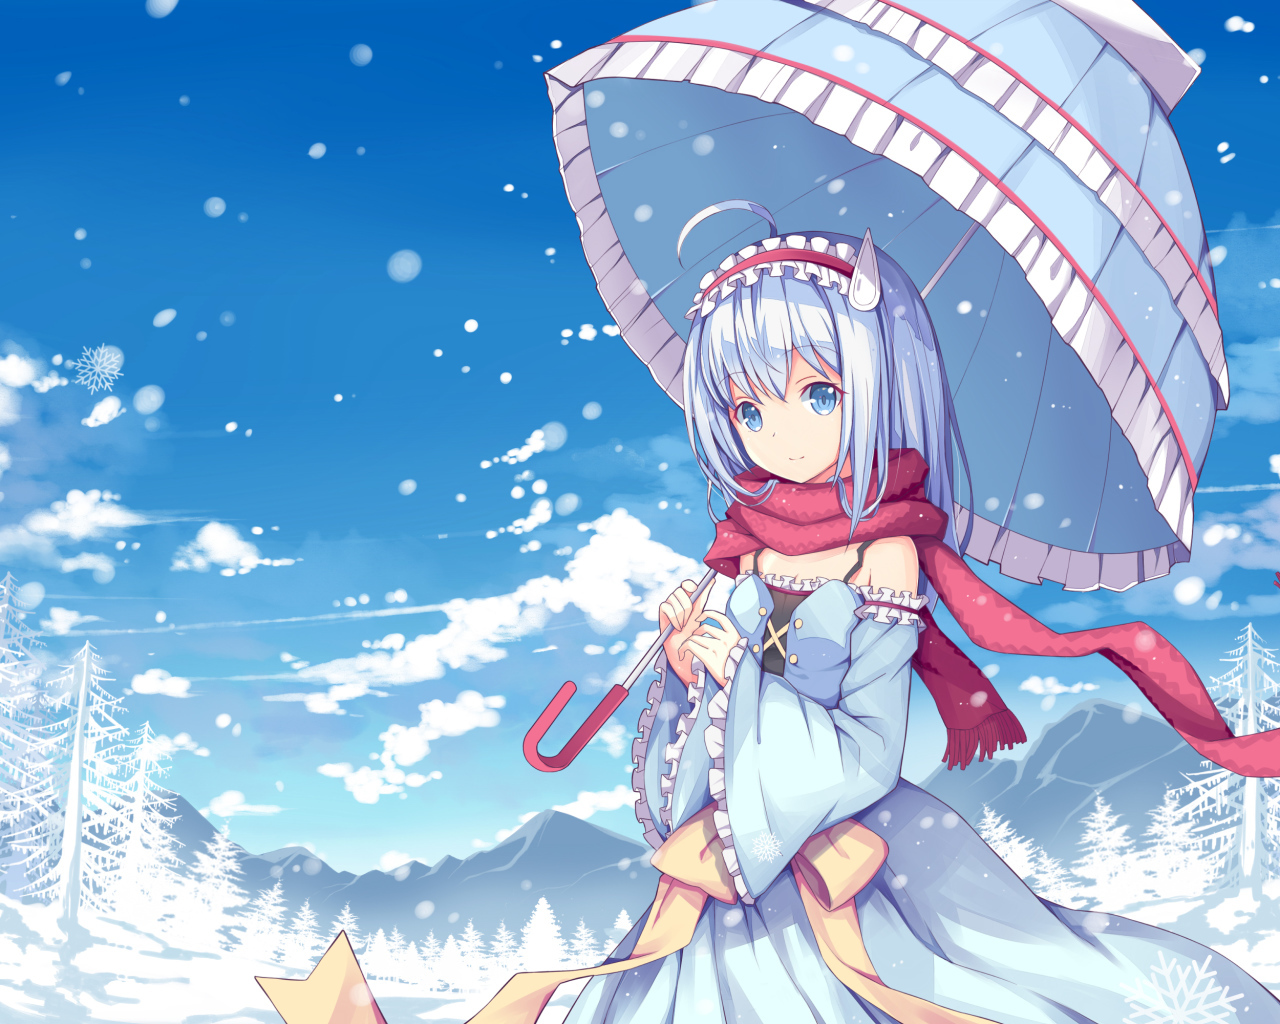 Anime girl with umbrella in a snowy forest